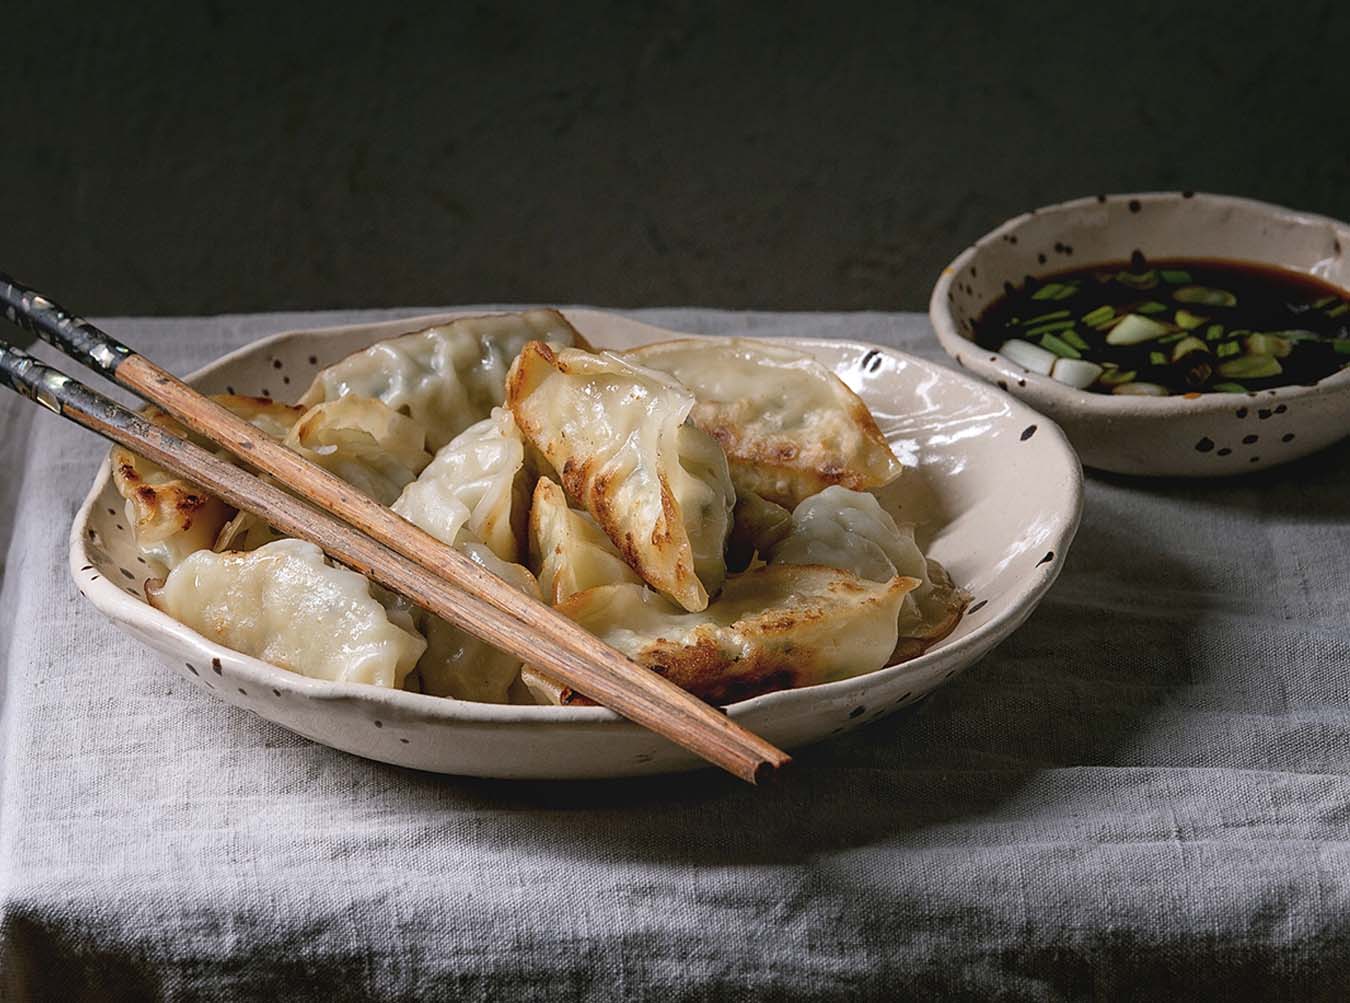 Air fried potstickers rather than pan-fried, they are so easy to make and take no more than about 11 minutes.